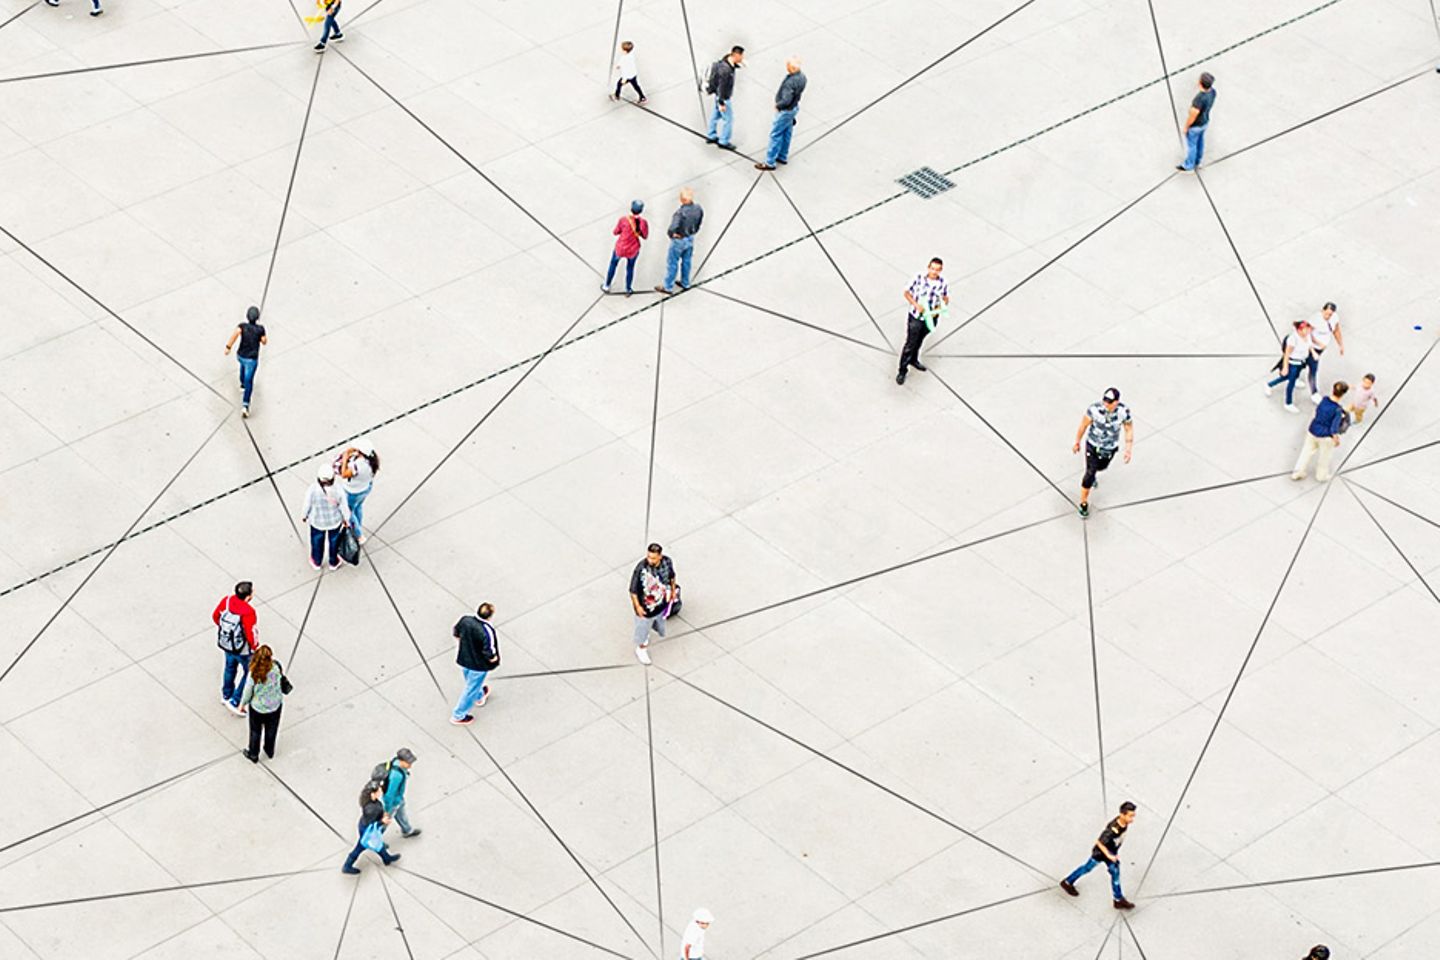 Picture from bird's eye view shows many people in small groups. The lines on the ground connect these groups.